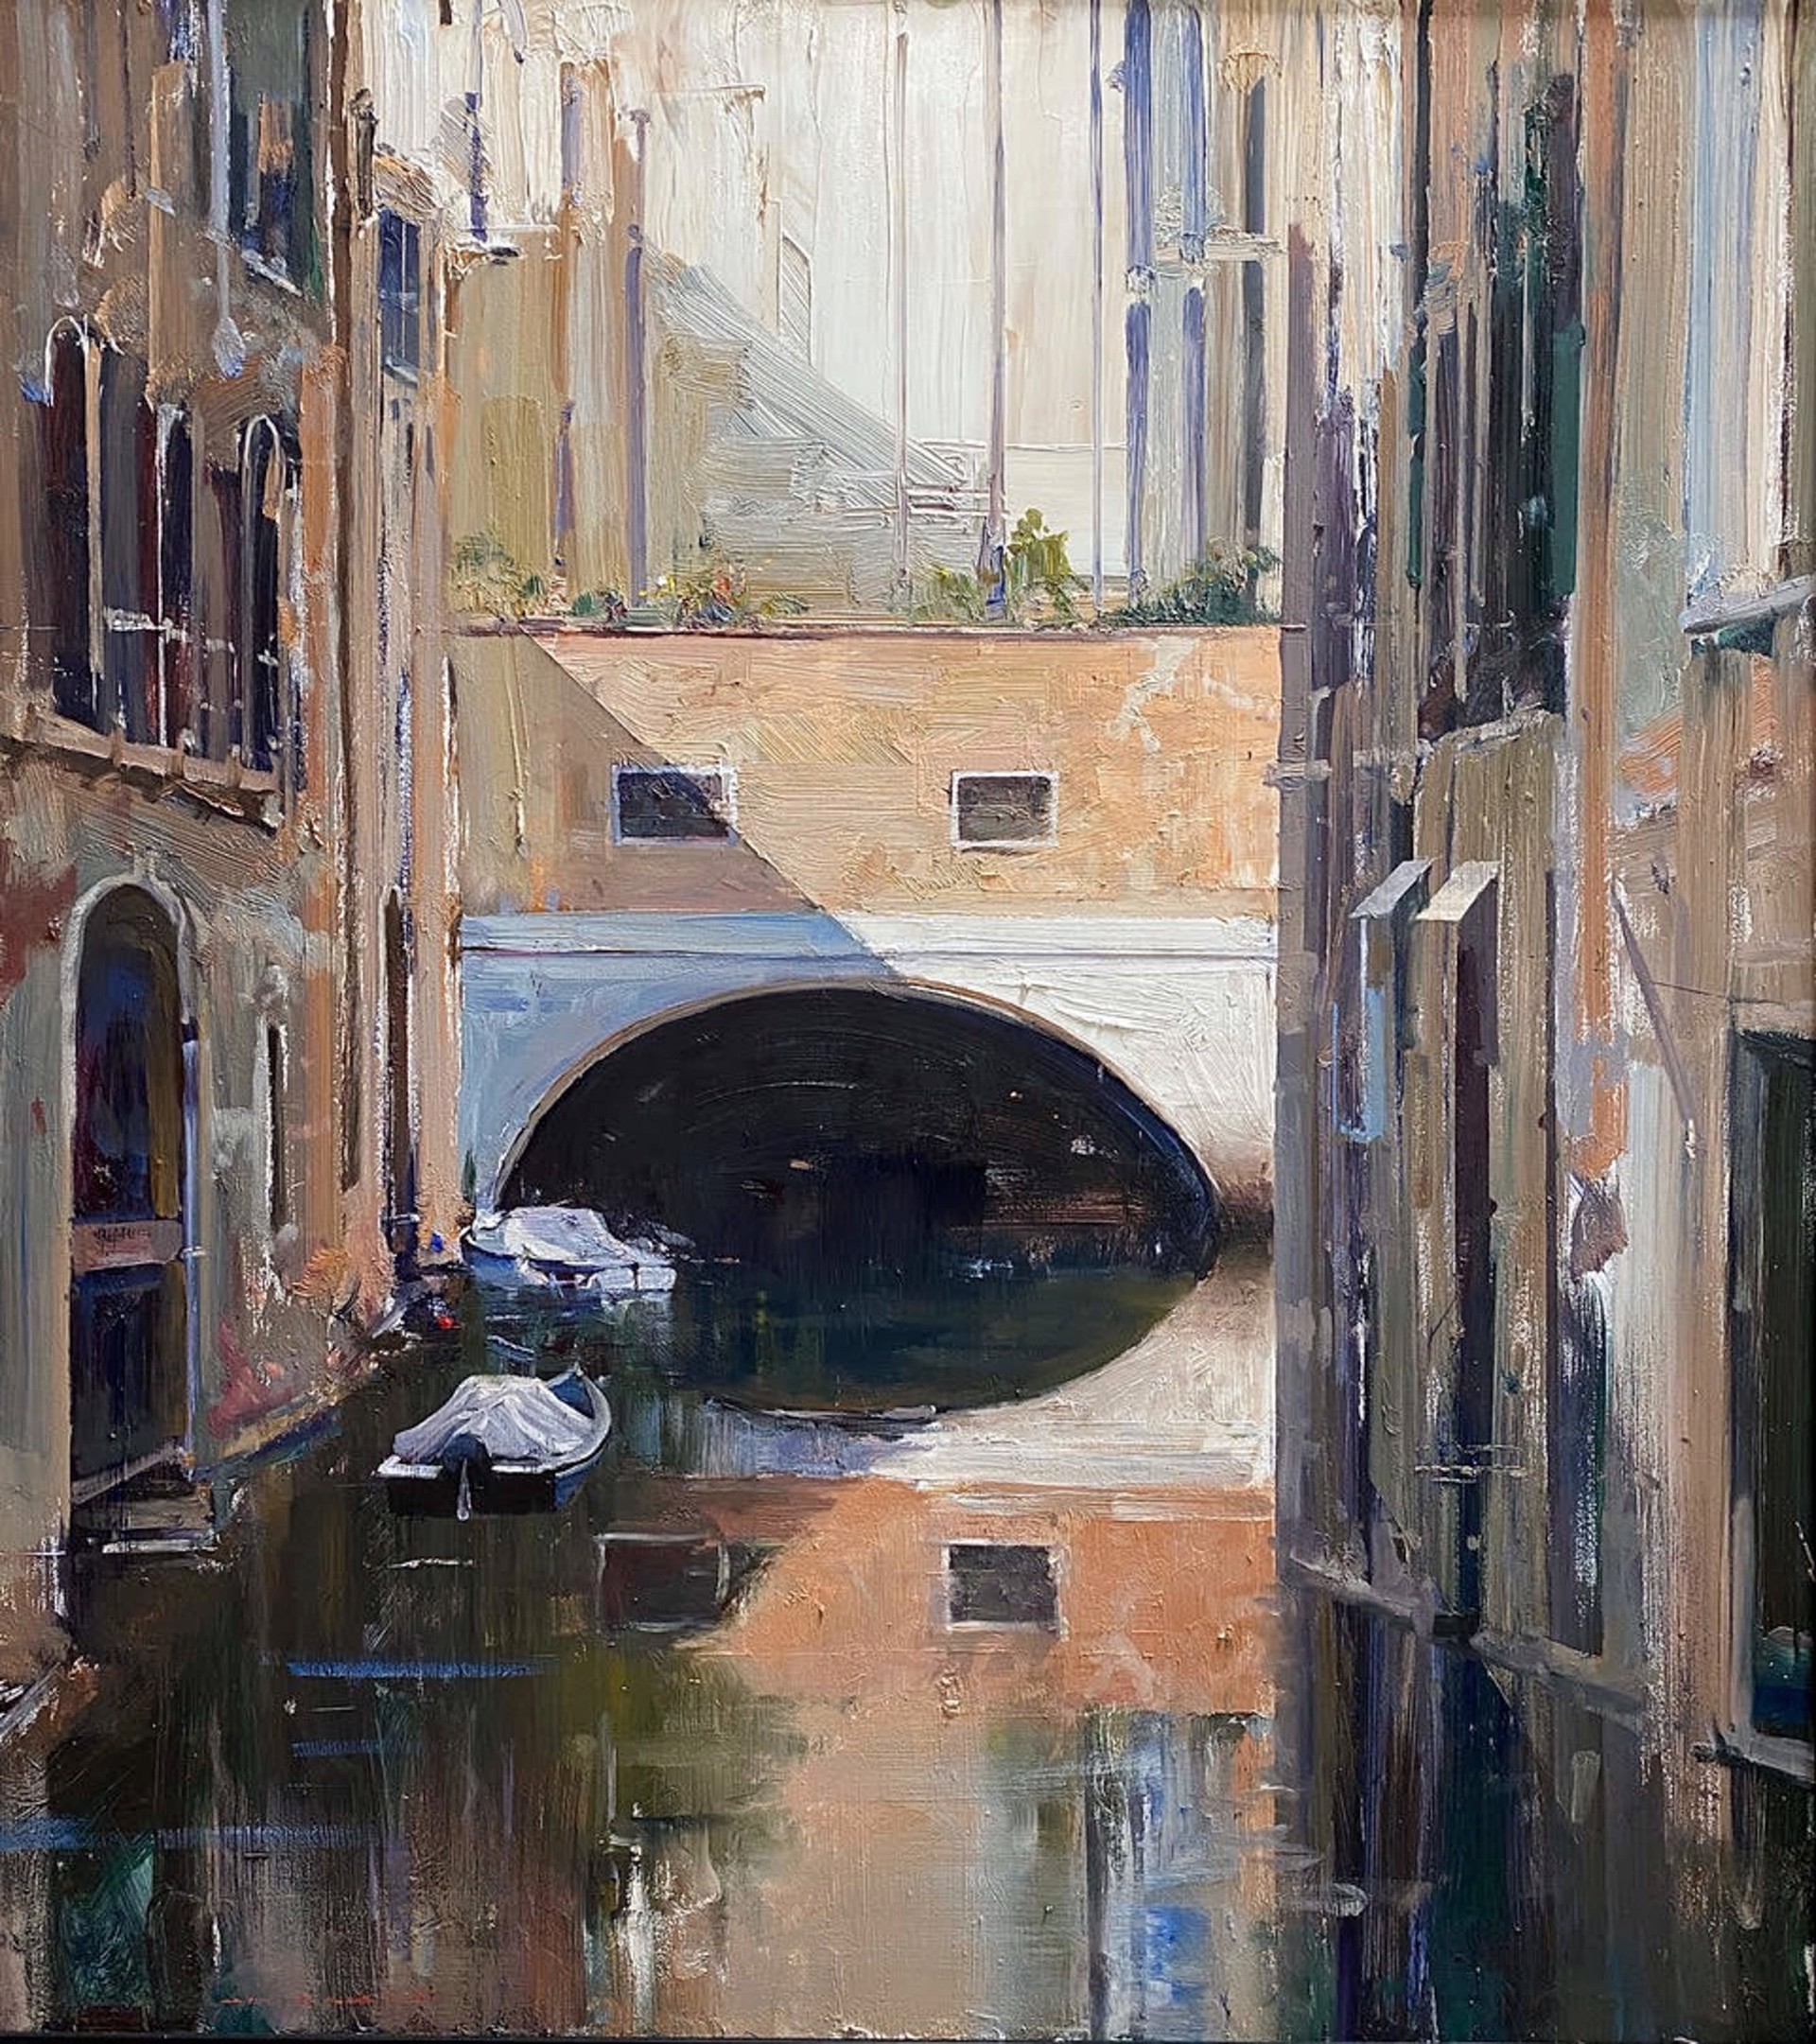 Untitled (Venice Canals) by Ken Knight